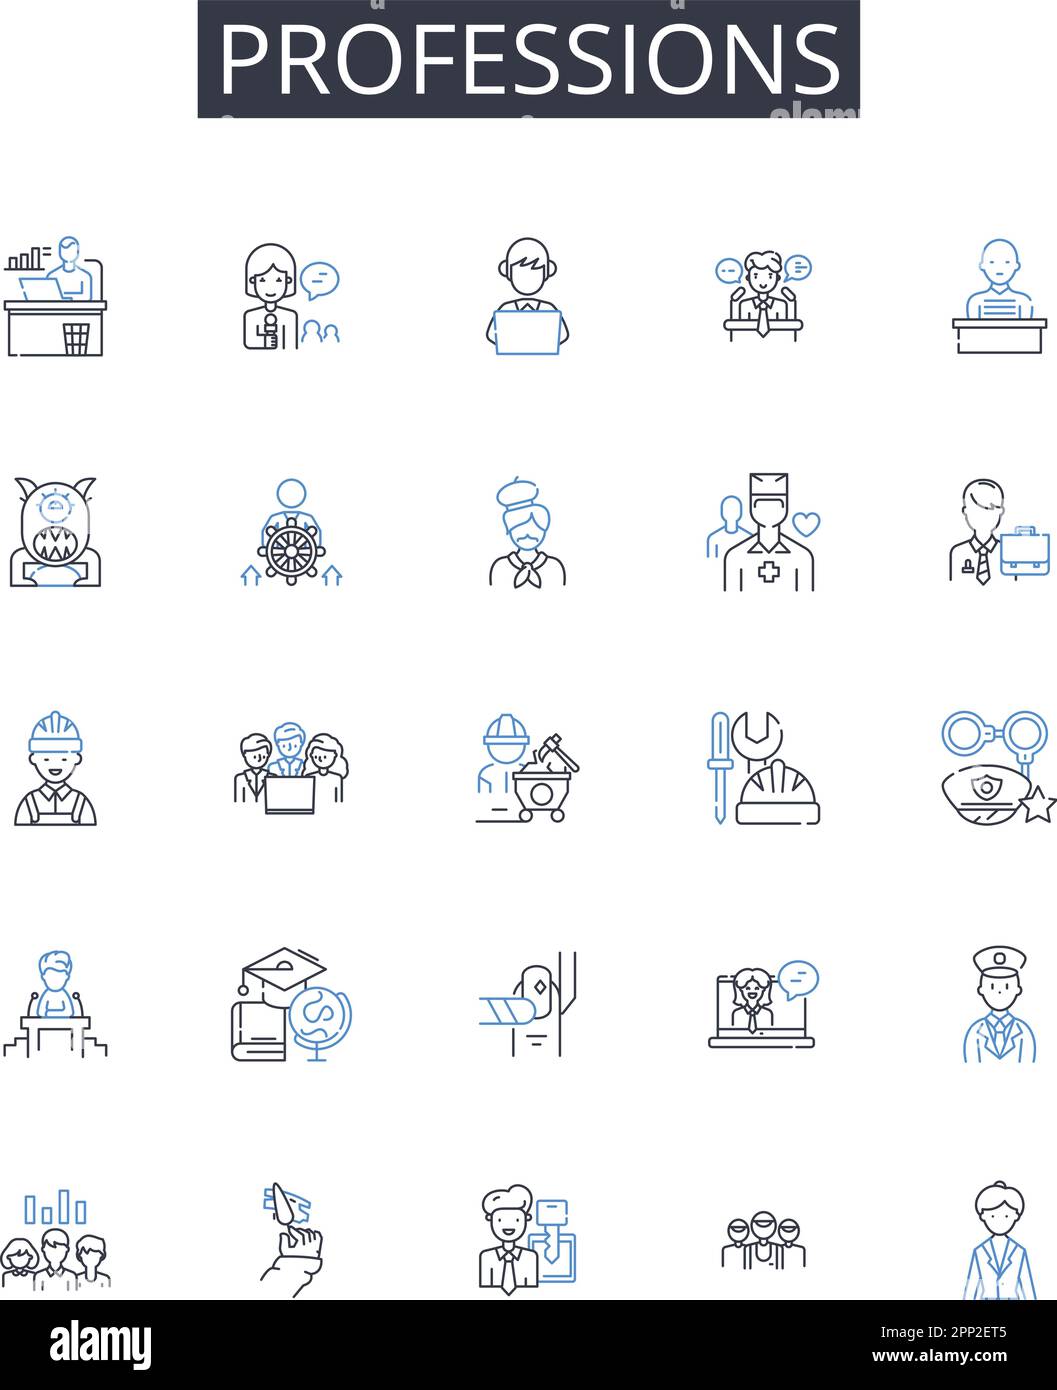 Professions line icons collection. Careers, Vocations, Occupations, Workforce, Tradespeople, Jobs, Employment vector and linear illustration Stock Vector